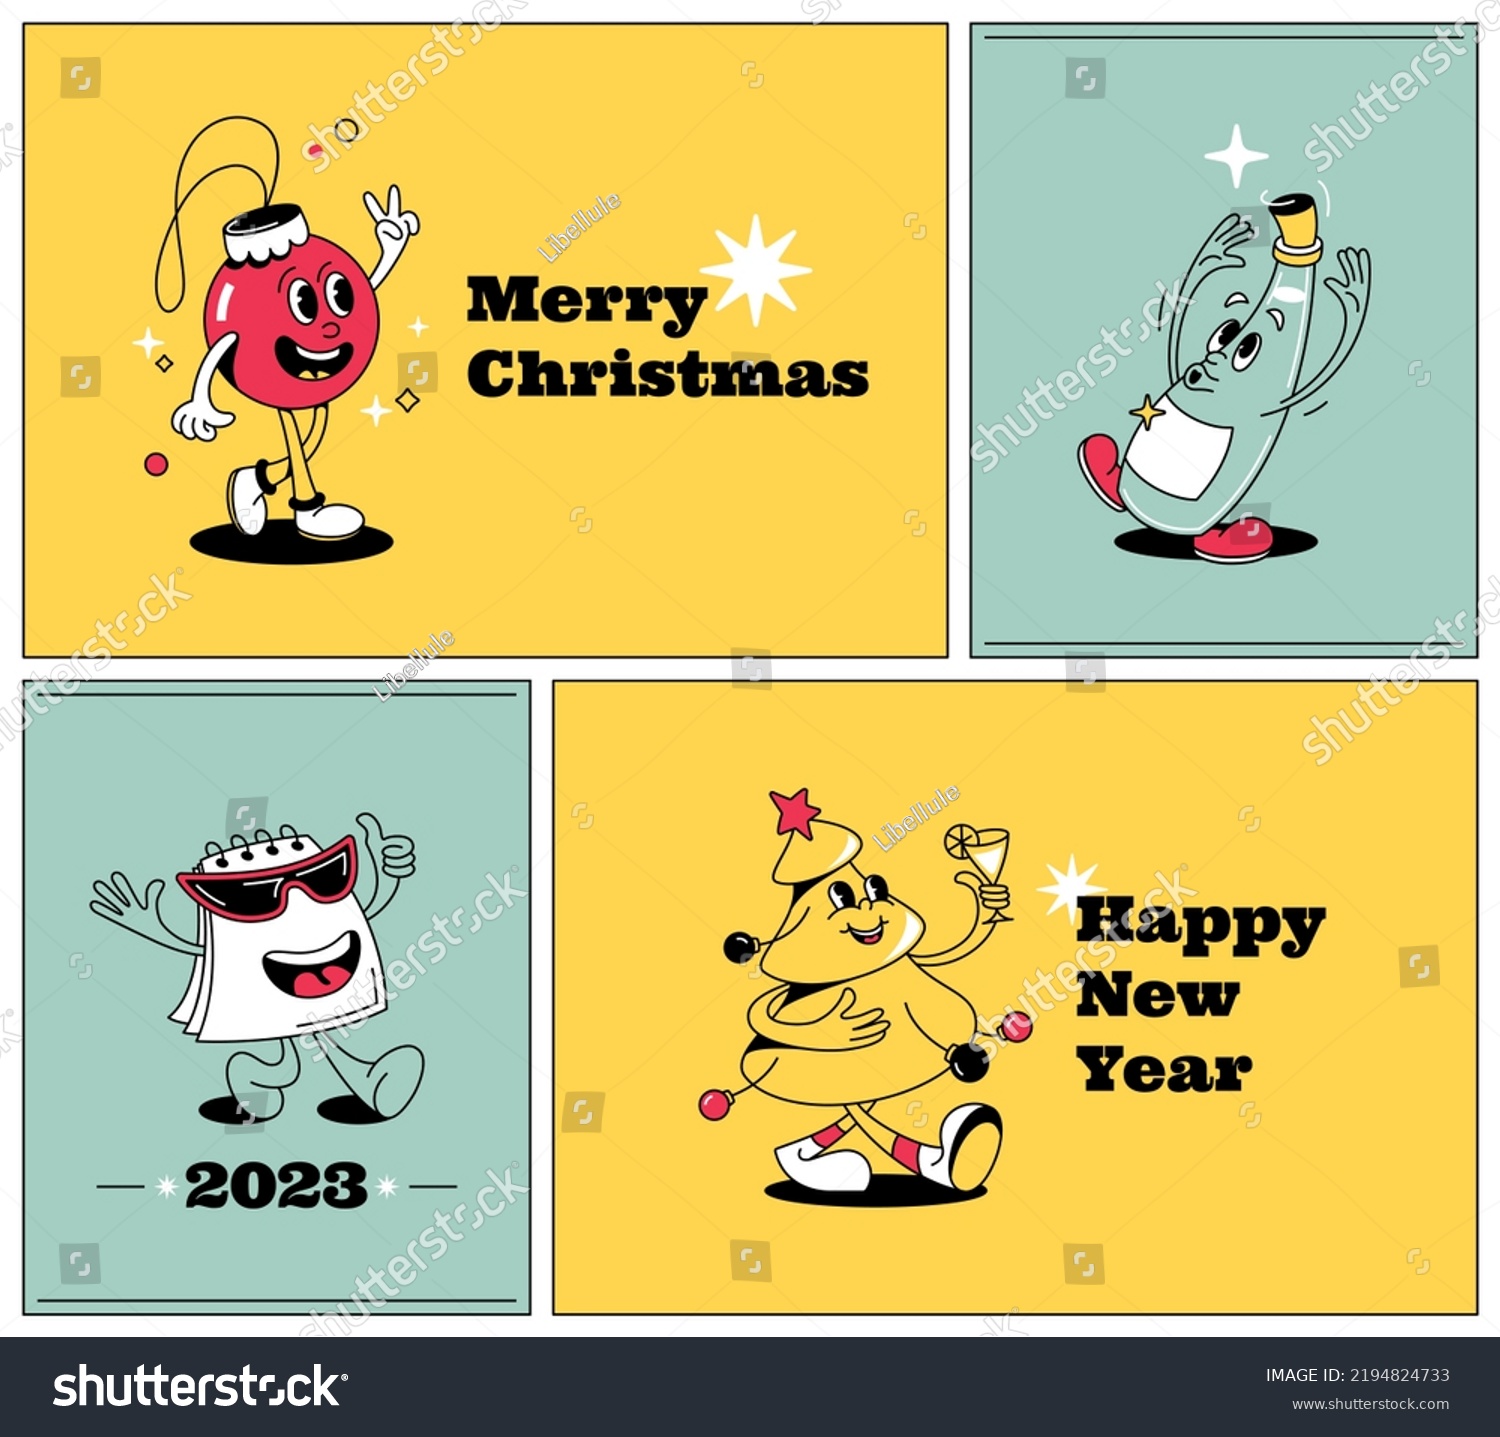 SVG of Christmas and New year greeting comic cards with retro style cartoon characters svg